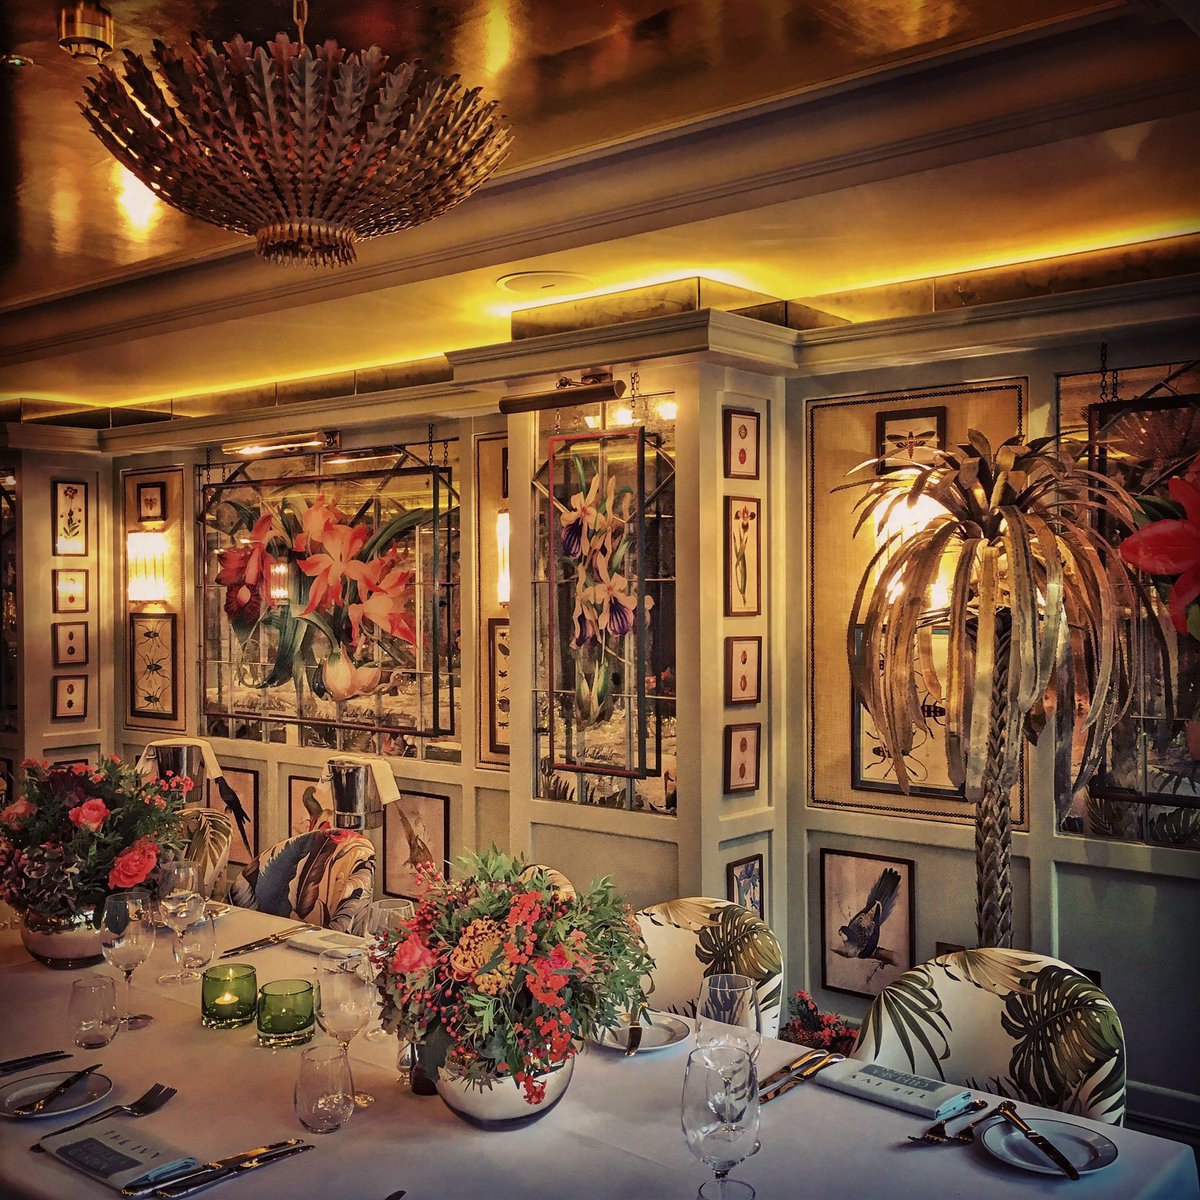 What a fantastic space @IvyChelsGarden @CapriceHoldings - snapped by @paulwf #theivy #chelsea